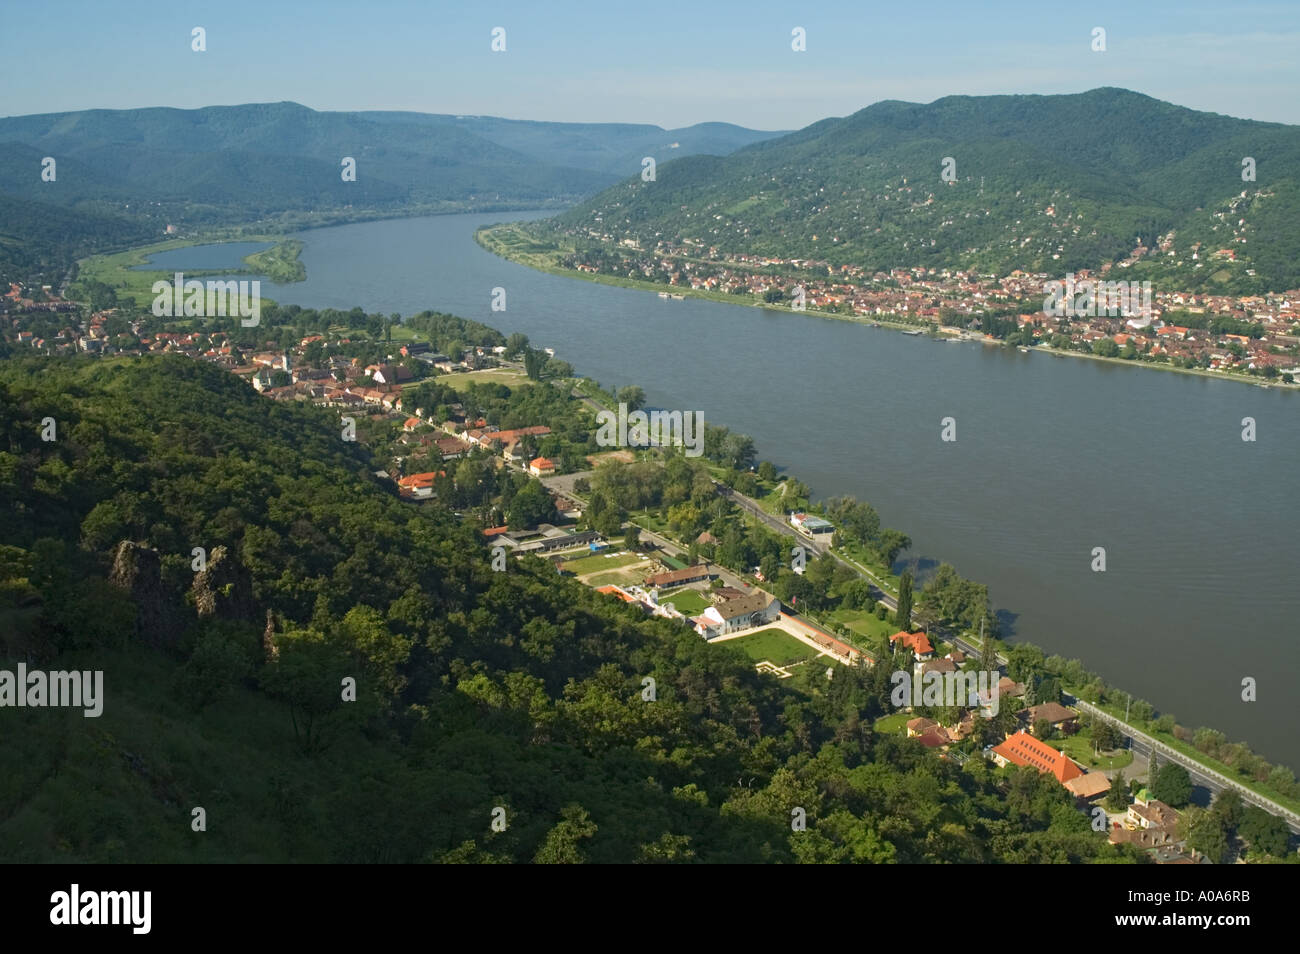 Hungary Visegrad view of Danube Bend from Fellegvar Castle in the Clouds Stock Photo